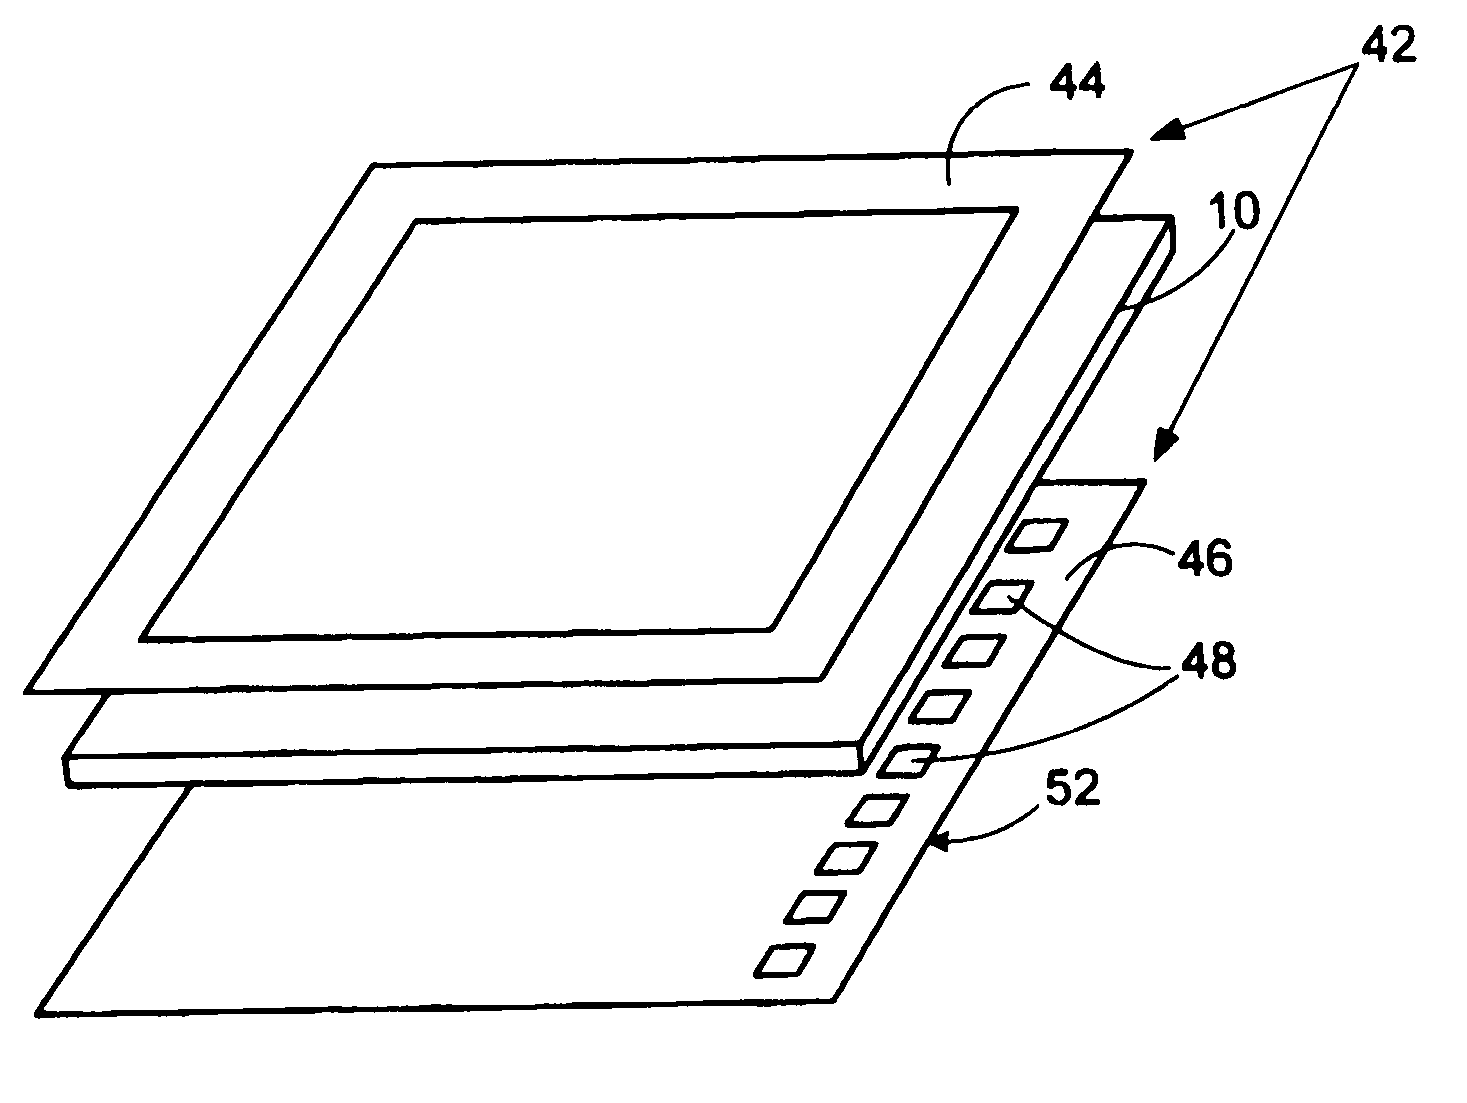 Electroluminescent display system